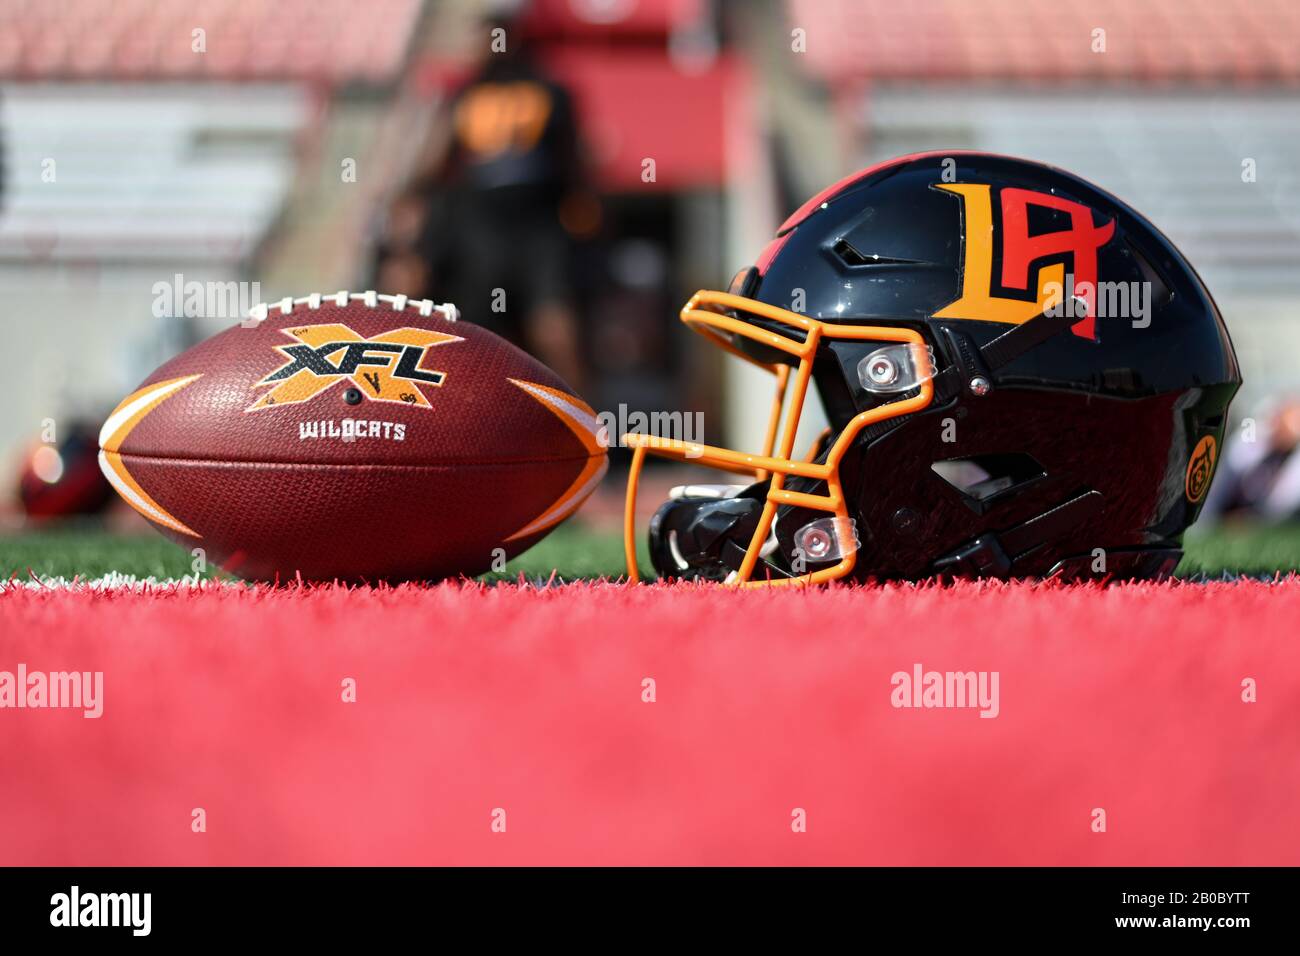 Detailed view of the LA Wildcats helmet and an official XFL football during practice, Wednesday, Feb. 19, 2020, in Long Beach, Calif. (Photo by IOS/ESPA-Images) Stock Photo